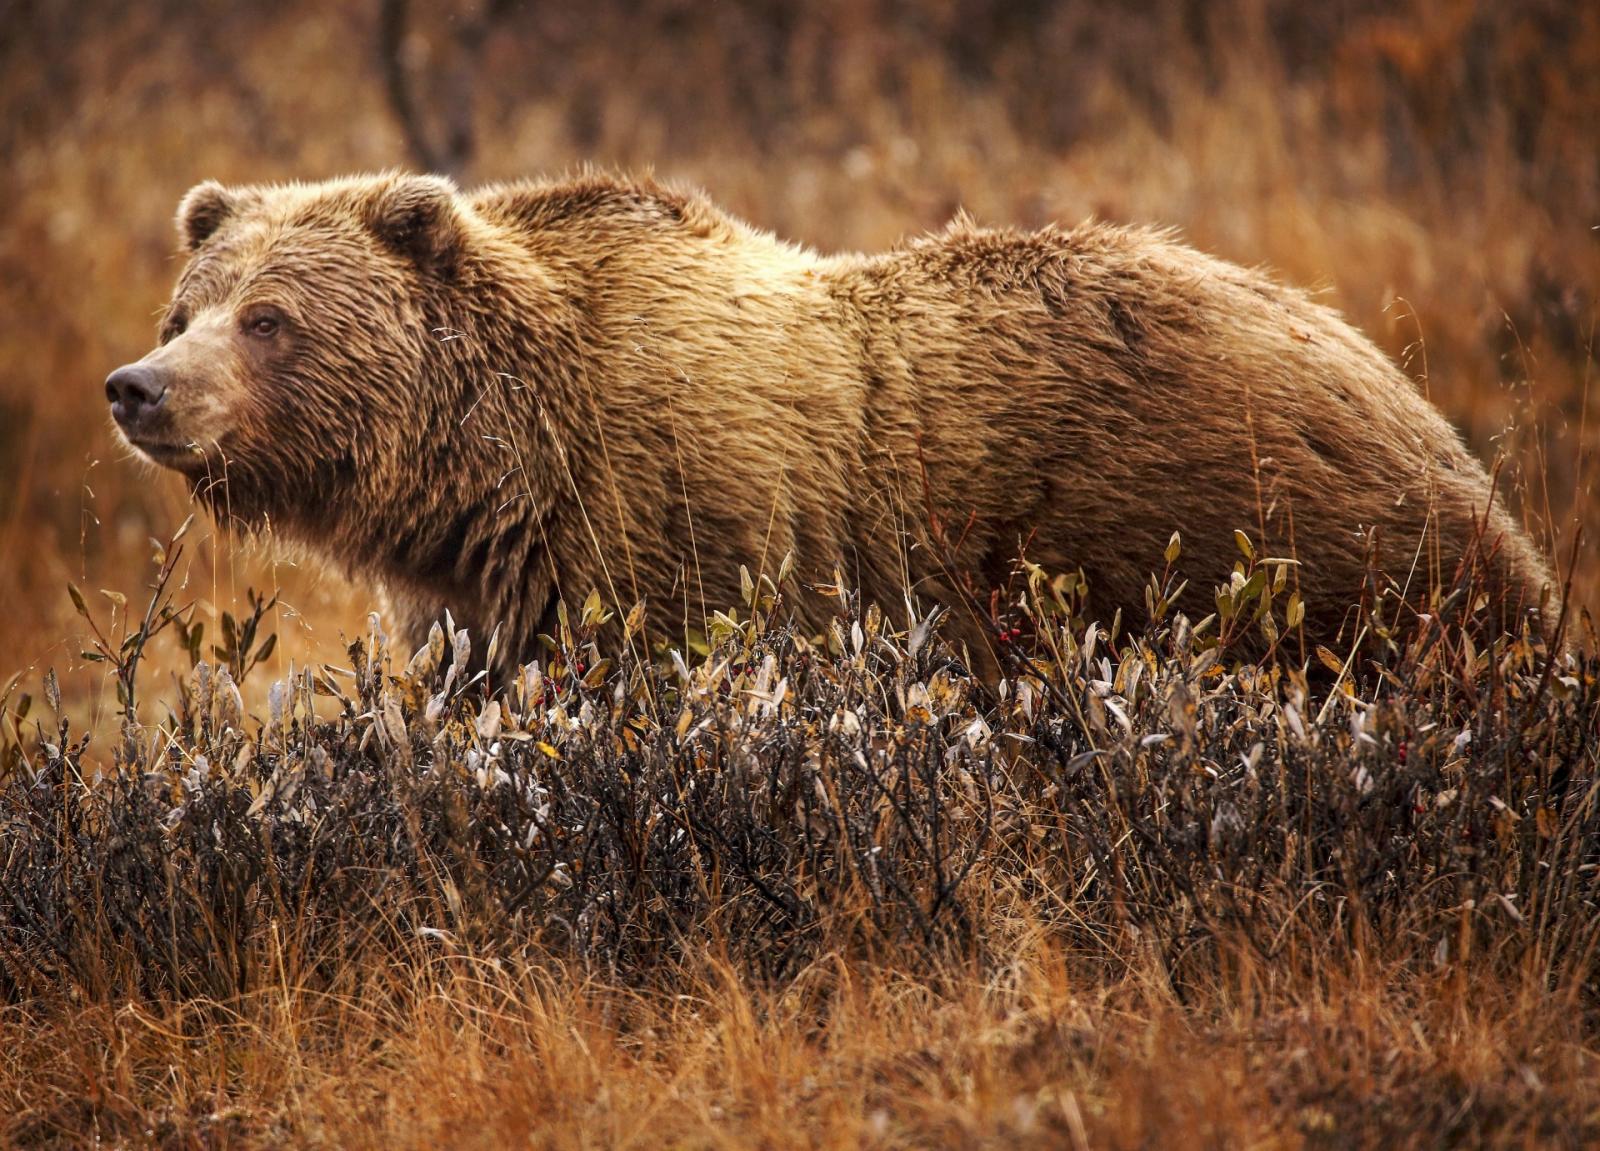 🐻 Can You Identify These US States Based on Their Official Animals? Grizzlybearjeanbeaufort